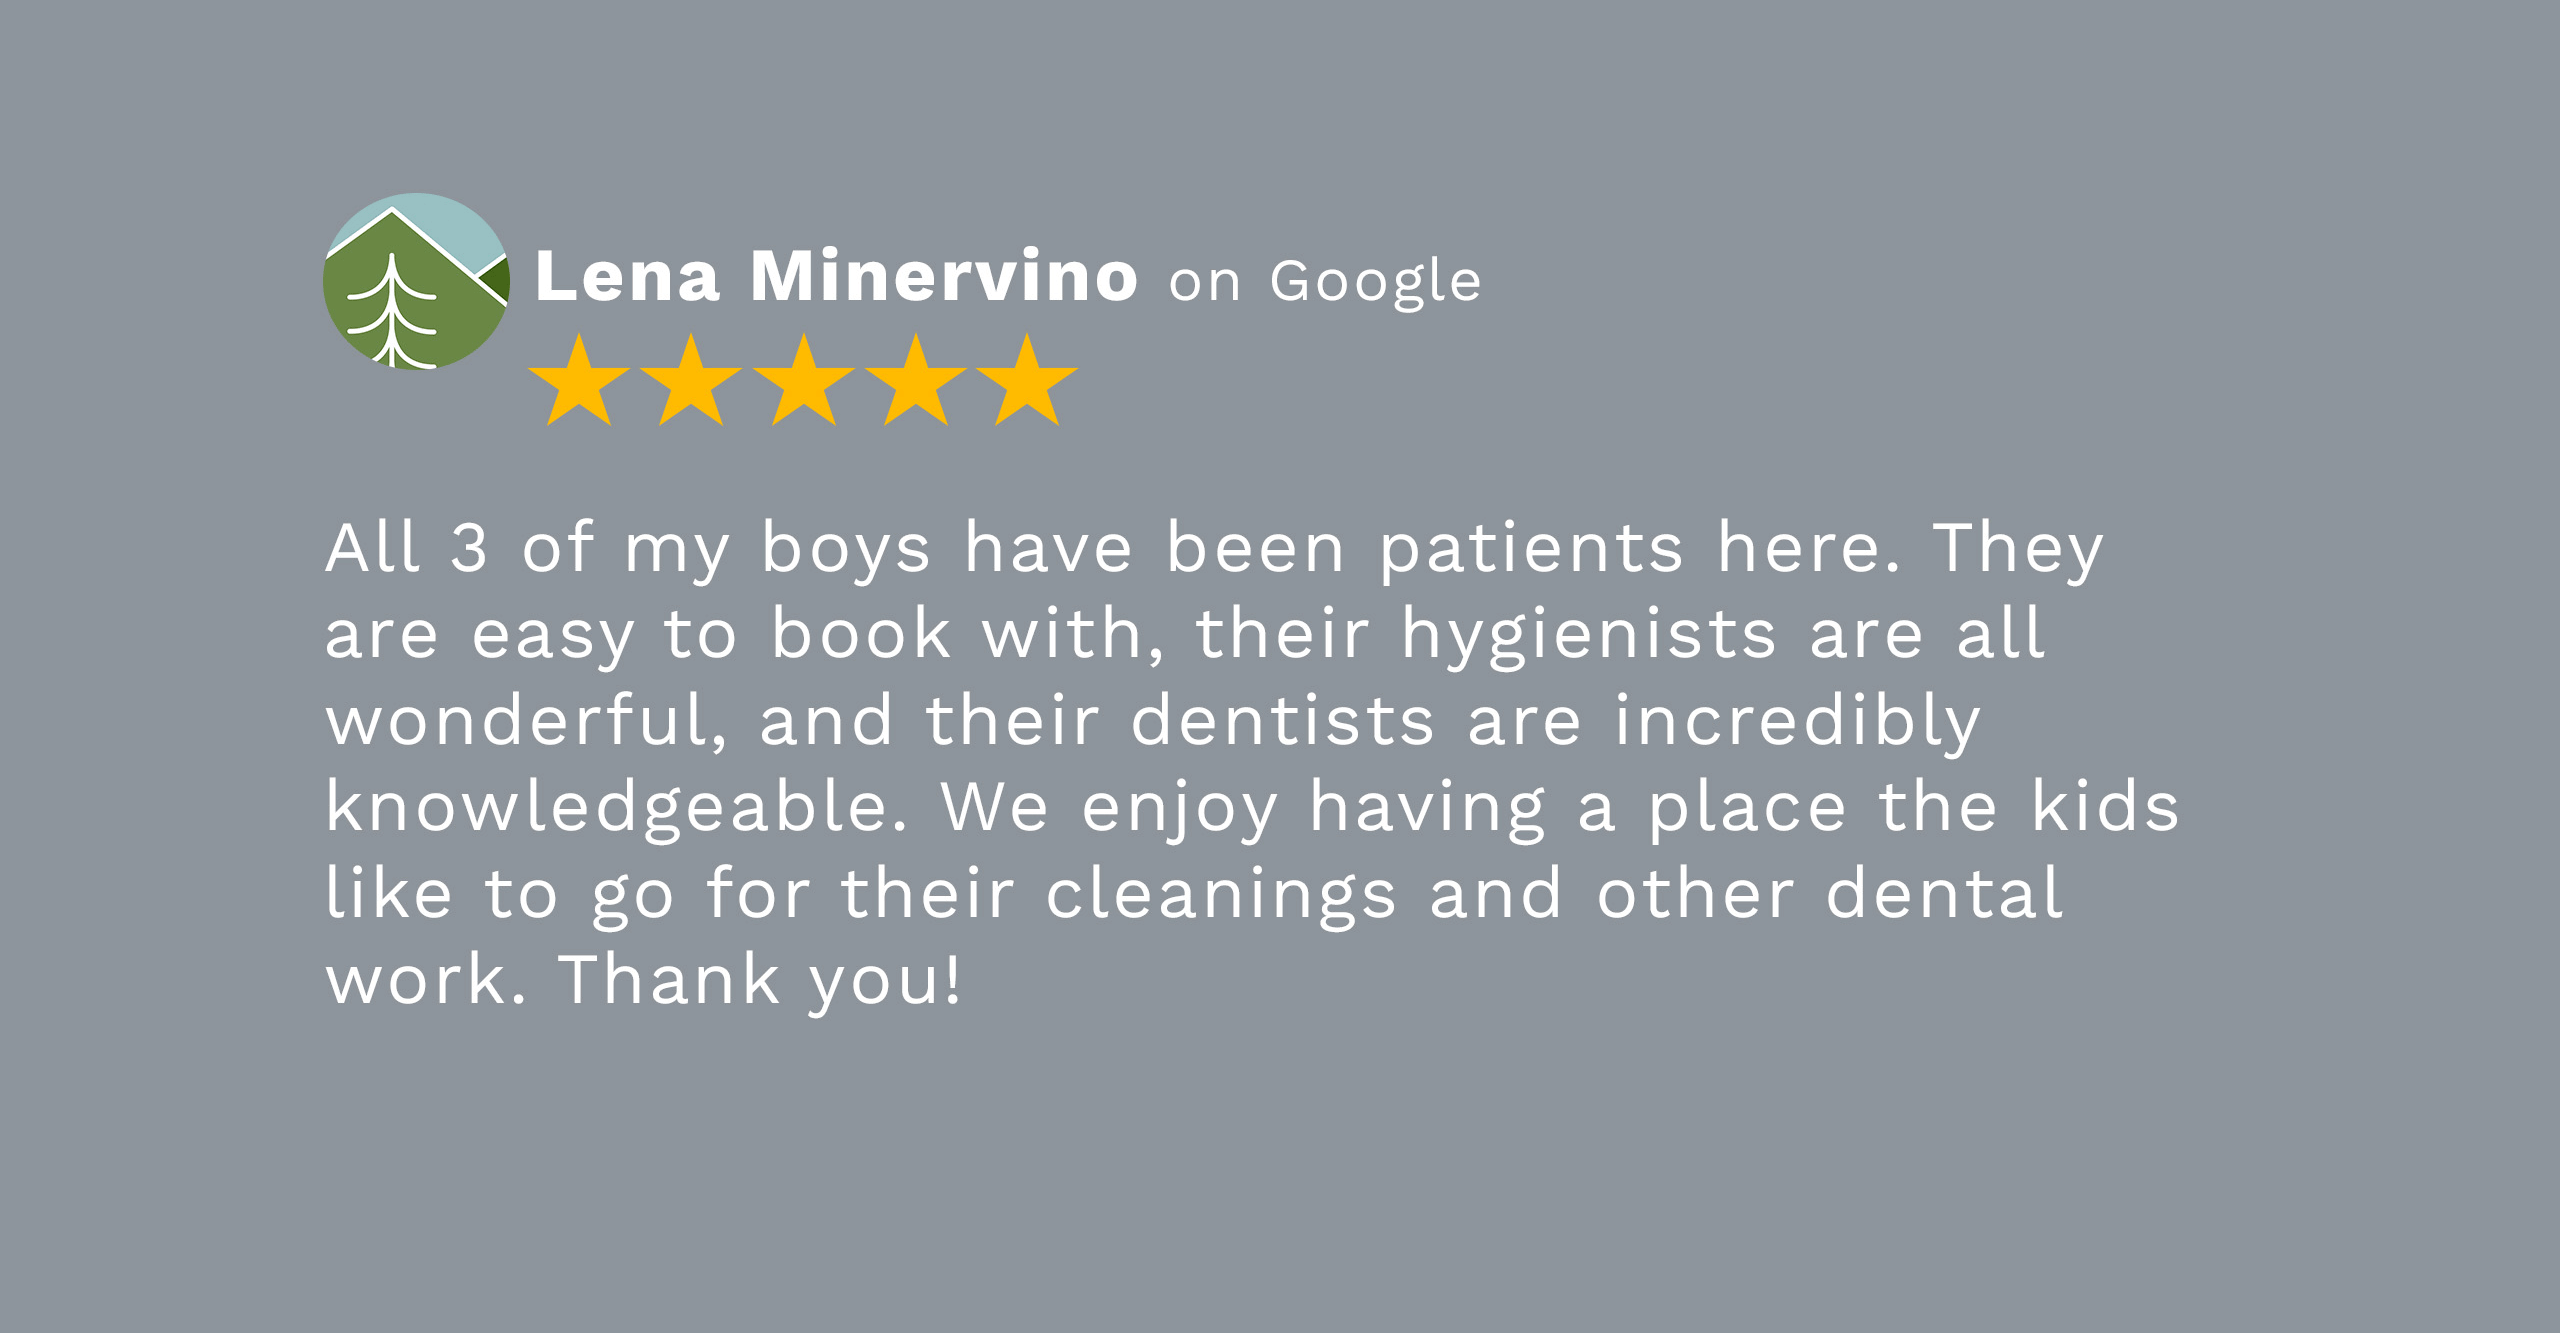 A decorative Google Review graphic with 5 stars and the name Lena Minervino.